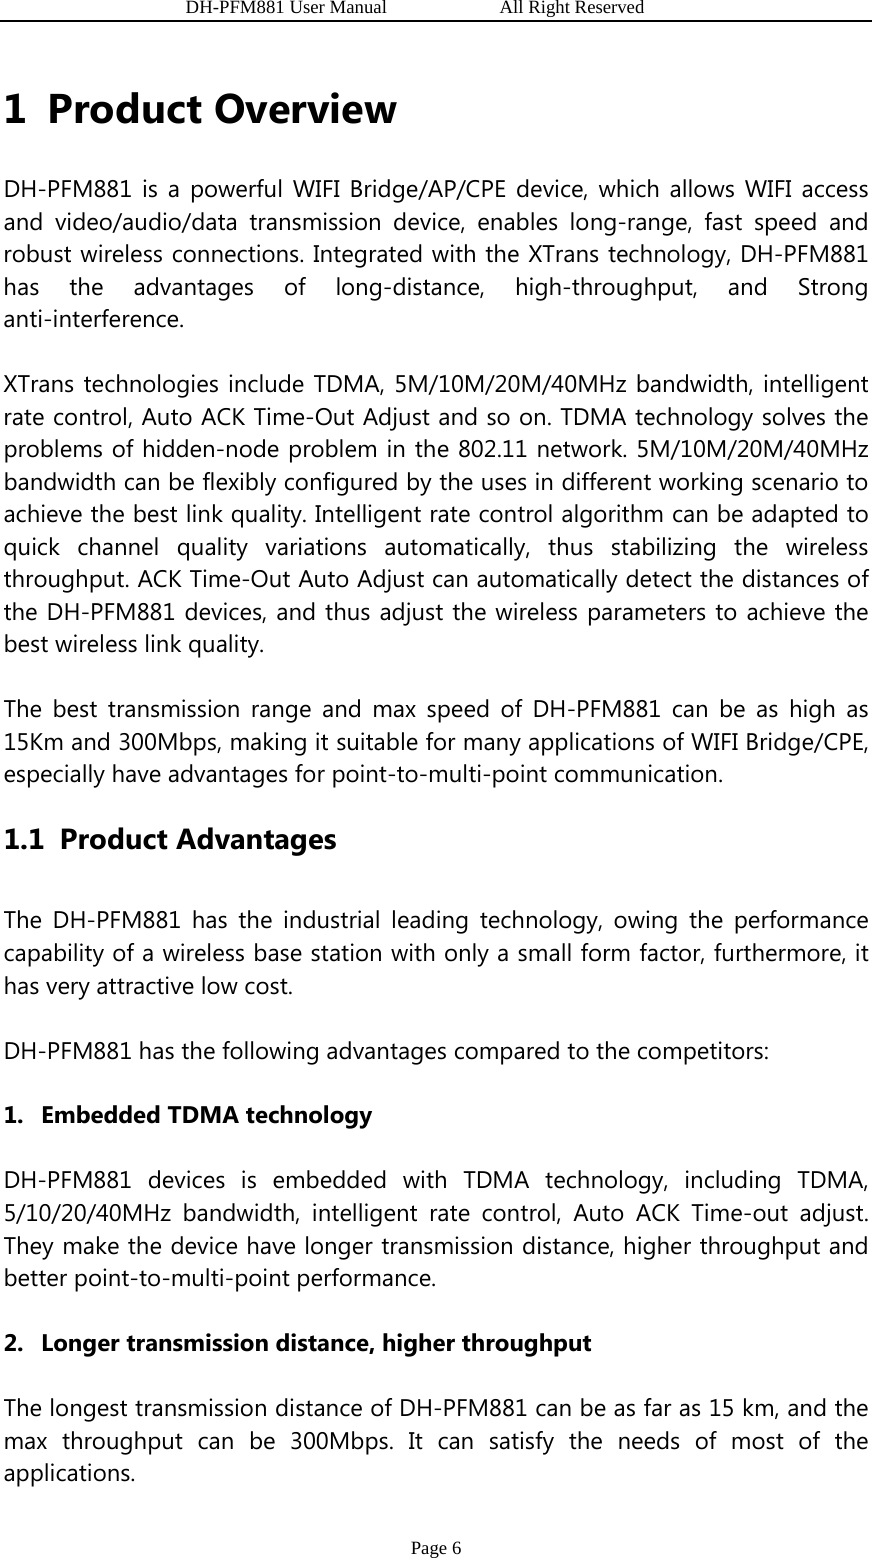                   DH-PFM881 User Manual            All Right Reserved Page 6 1 Product Overview DH-PFM881 is a powerful WIFI Bridge/AP/CPE device, which allows WIFI access and video/audio/data transmission device, enables long-range, fast speed and robust wireless connections. Integrated with the XTrans technology, DH-PFM881 has the advantages of long-distance, high-throughput, and Strong anti-interference. XTrans technologies include TDMA, 5M/10M/20M/40MHz bandwidth, intelligent rate control, Auto ACK Time-Out Adjust and so on. TDMA technology solves the problems of hidden-node problem in the 802.11 network. 5M/10M/20M/40MHz bandwidth can be flexibly configured by the uses in different working scenario to achieve the best link quality. Intelligent rate control algorithm can be adapted to quick channel quality variations automatically, thus stabilizing the wireless throughput. ACK Time-Out Auto Adjust can automatically detect the distances of the DH-PFM881 devices, and thus adjust the wireless parameters to achieve the best wireless link quality. The best transmission range and max speed of DH-PFM881 can be as high as 15Km and 300Mbps, making it suitable for many applications of WIFI Bridge/CPE, especially have advantages for point-to-multi-point communication. 1.1 Product Advantages The DH-PFM881 has the industrial leading technology, owing the performance capability of a wireless base station with only a small form factor, furthermore, it has very attractive low cost. DH-PFM881 has the following advantages compared to the competitors: 1. Embedded TDMA technology DH-PFM881 devices is embedded with TDMA technology, including TDMA, 5/10/20/40MHz bandwidth, intelligent rate control, Auto ACK Time-out adjust. They make the device have longer transmission distance, higher throughput and better point-to-multi-point performance. 2. Longer transmission distance, higher throughput The longest transmission distance of DH-PFM881 can be as far as 15 km, and the max throughput can be 300Mbps. It can satisfy the needs of most of the applications. 